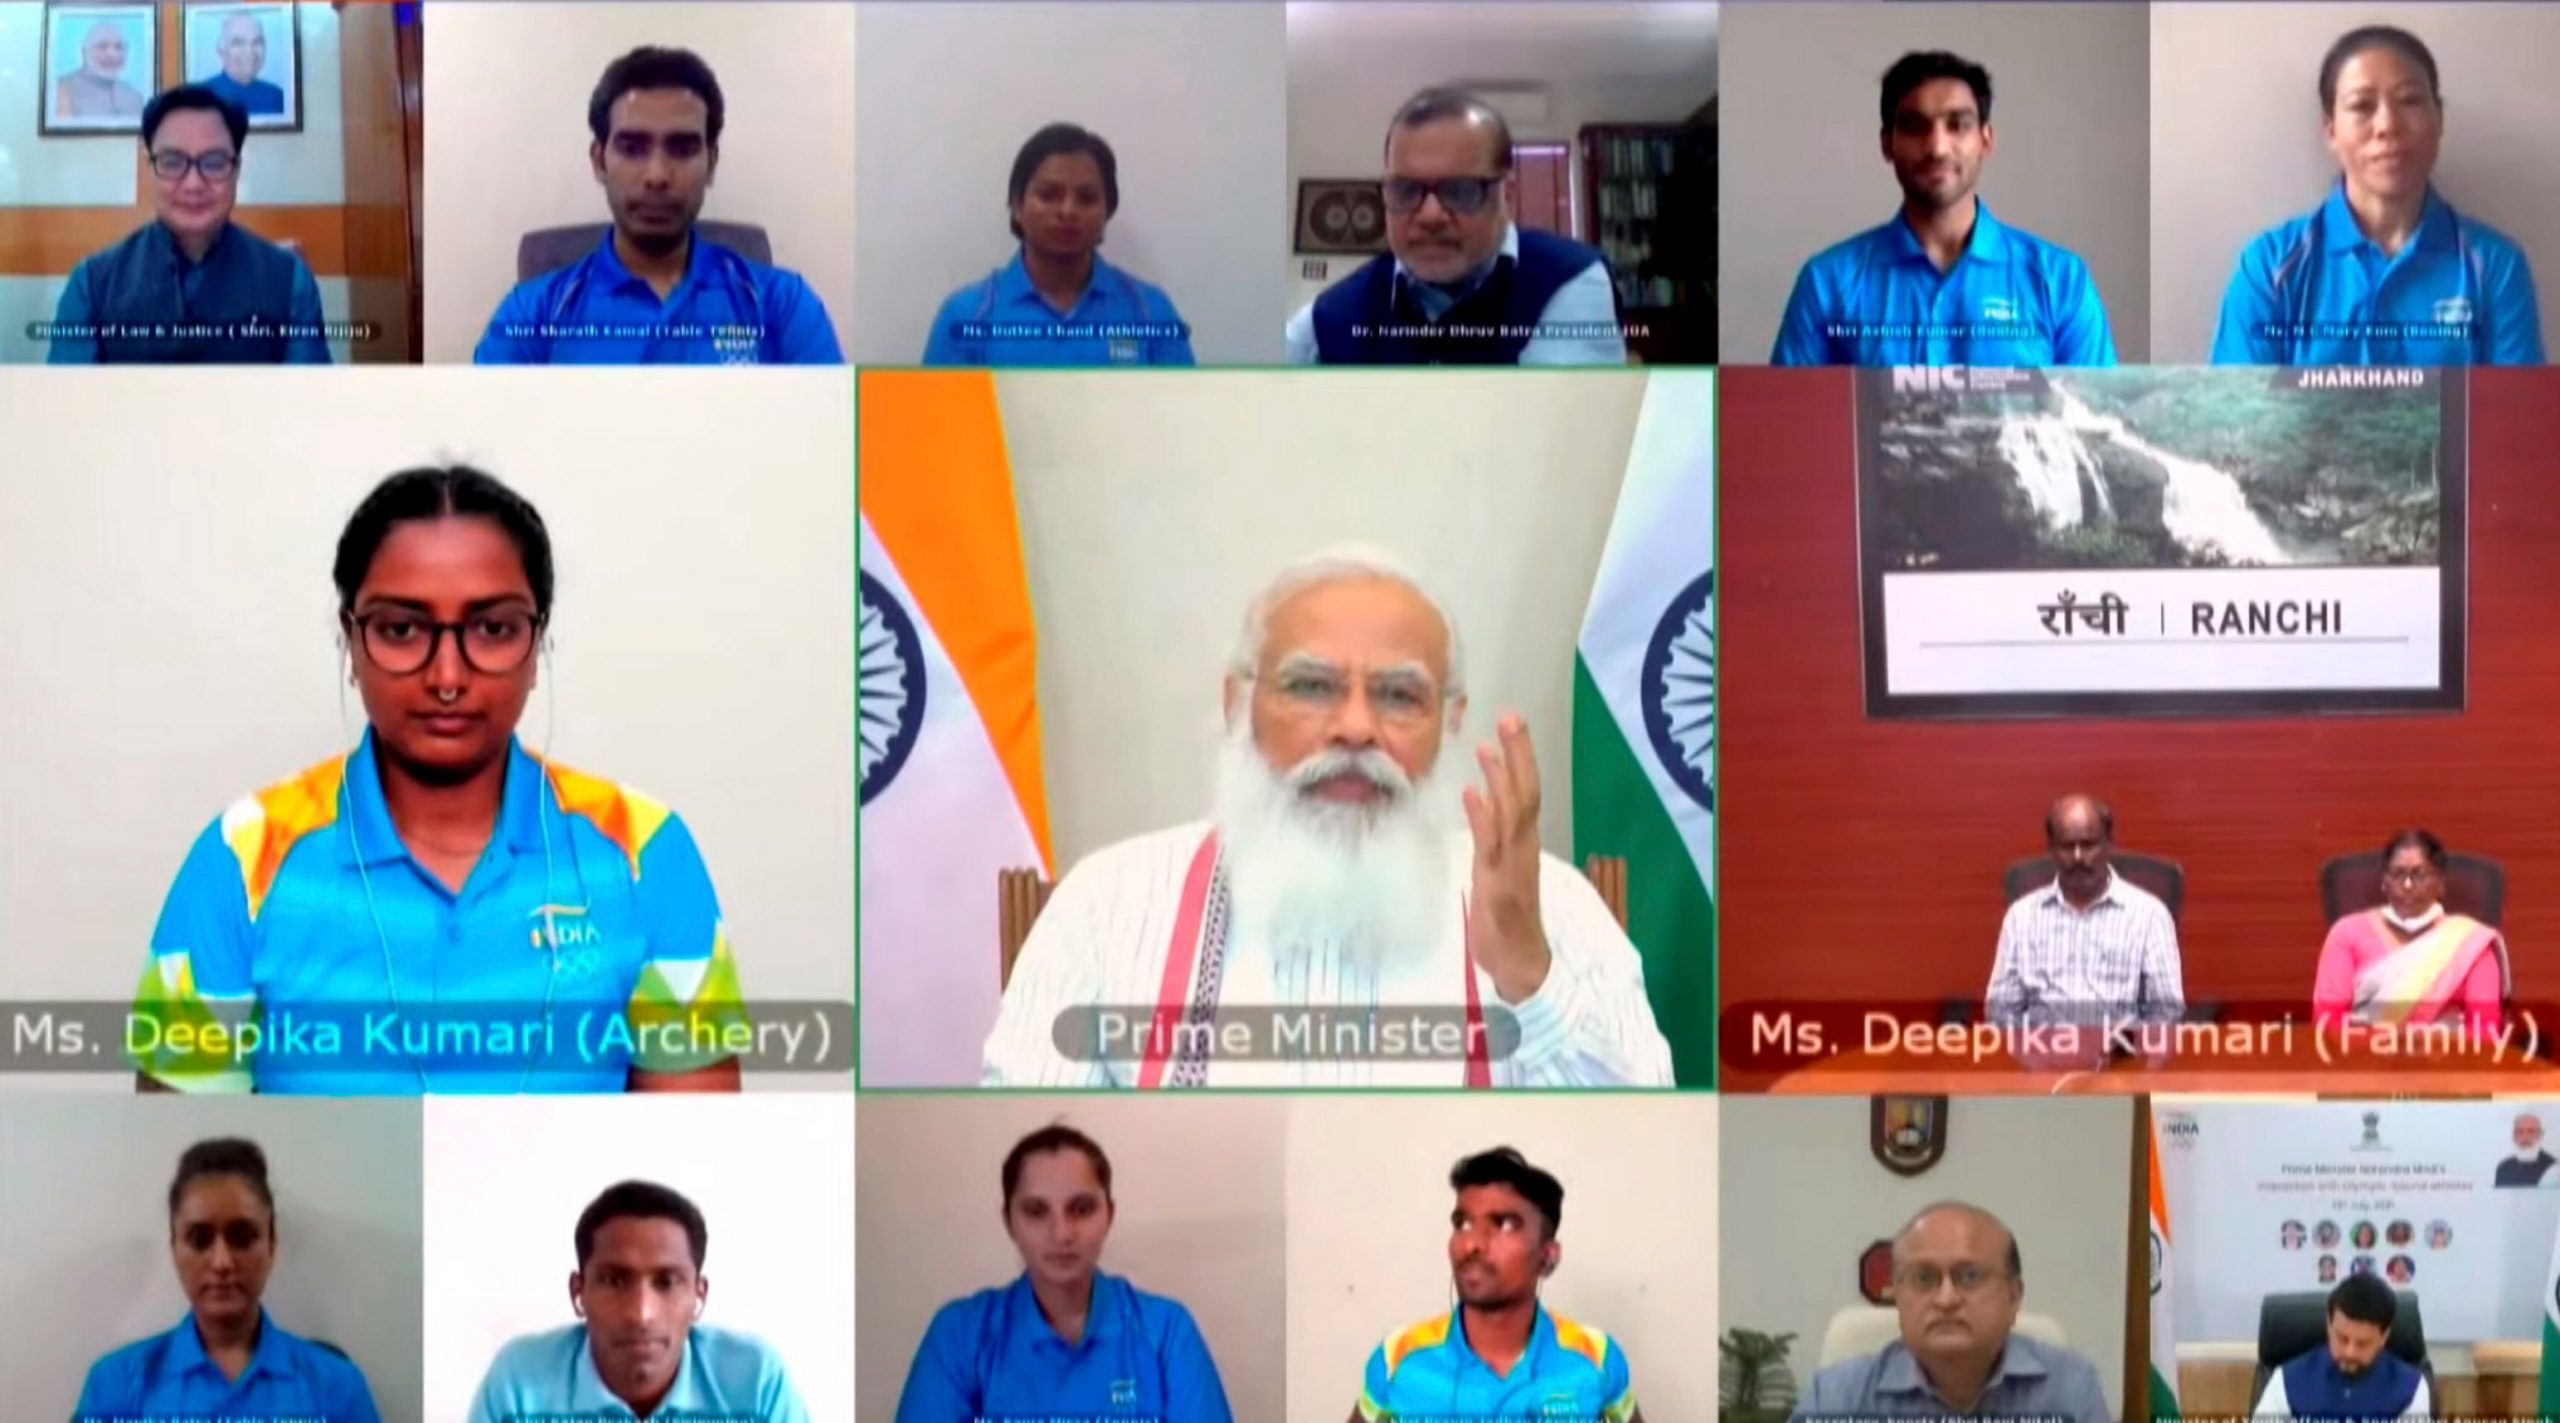 What India’s Olympic-bound athletes said after conversation with PM Modi